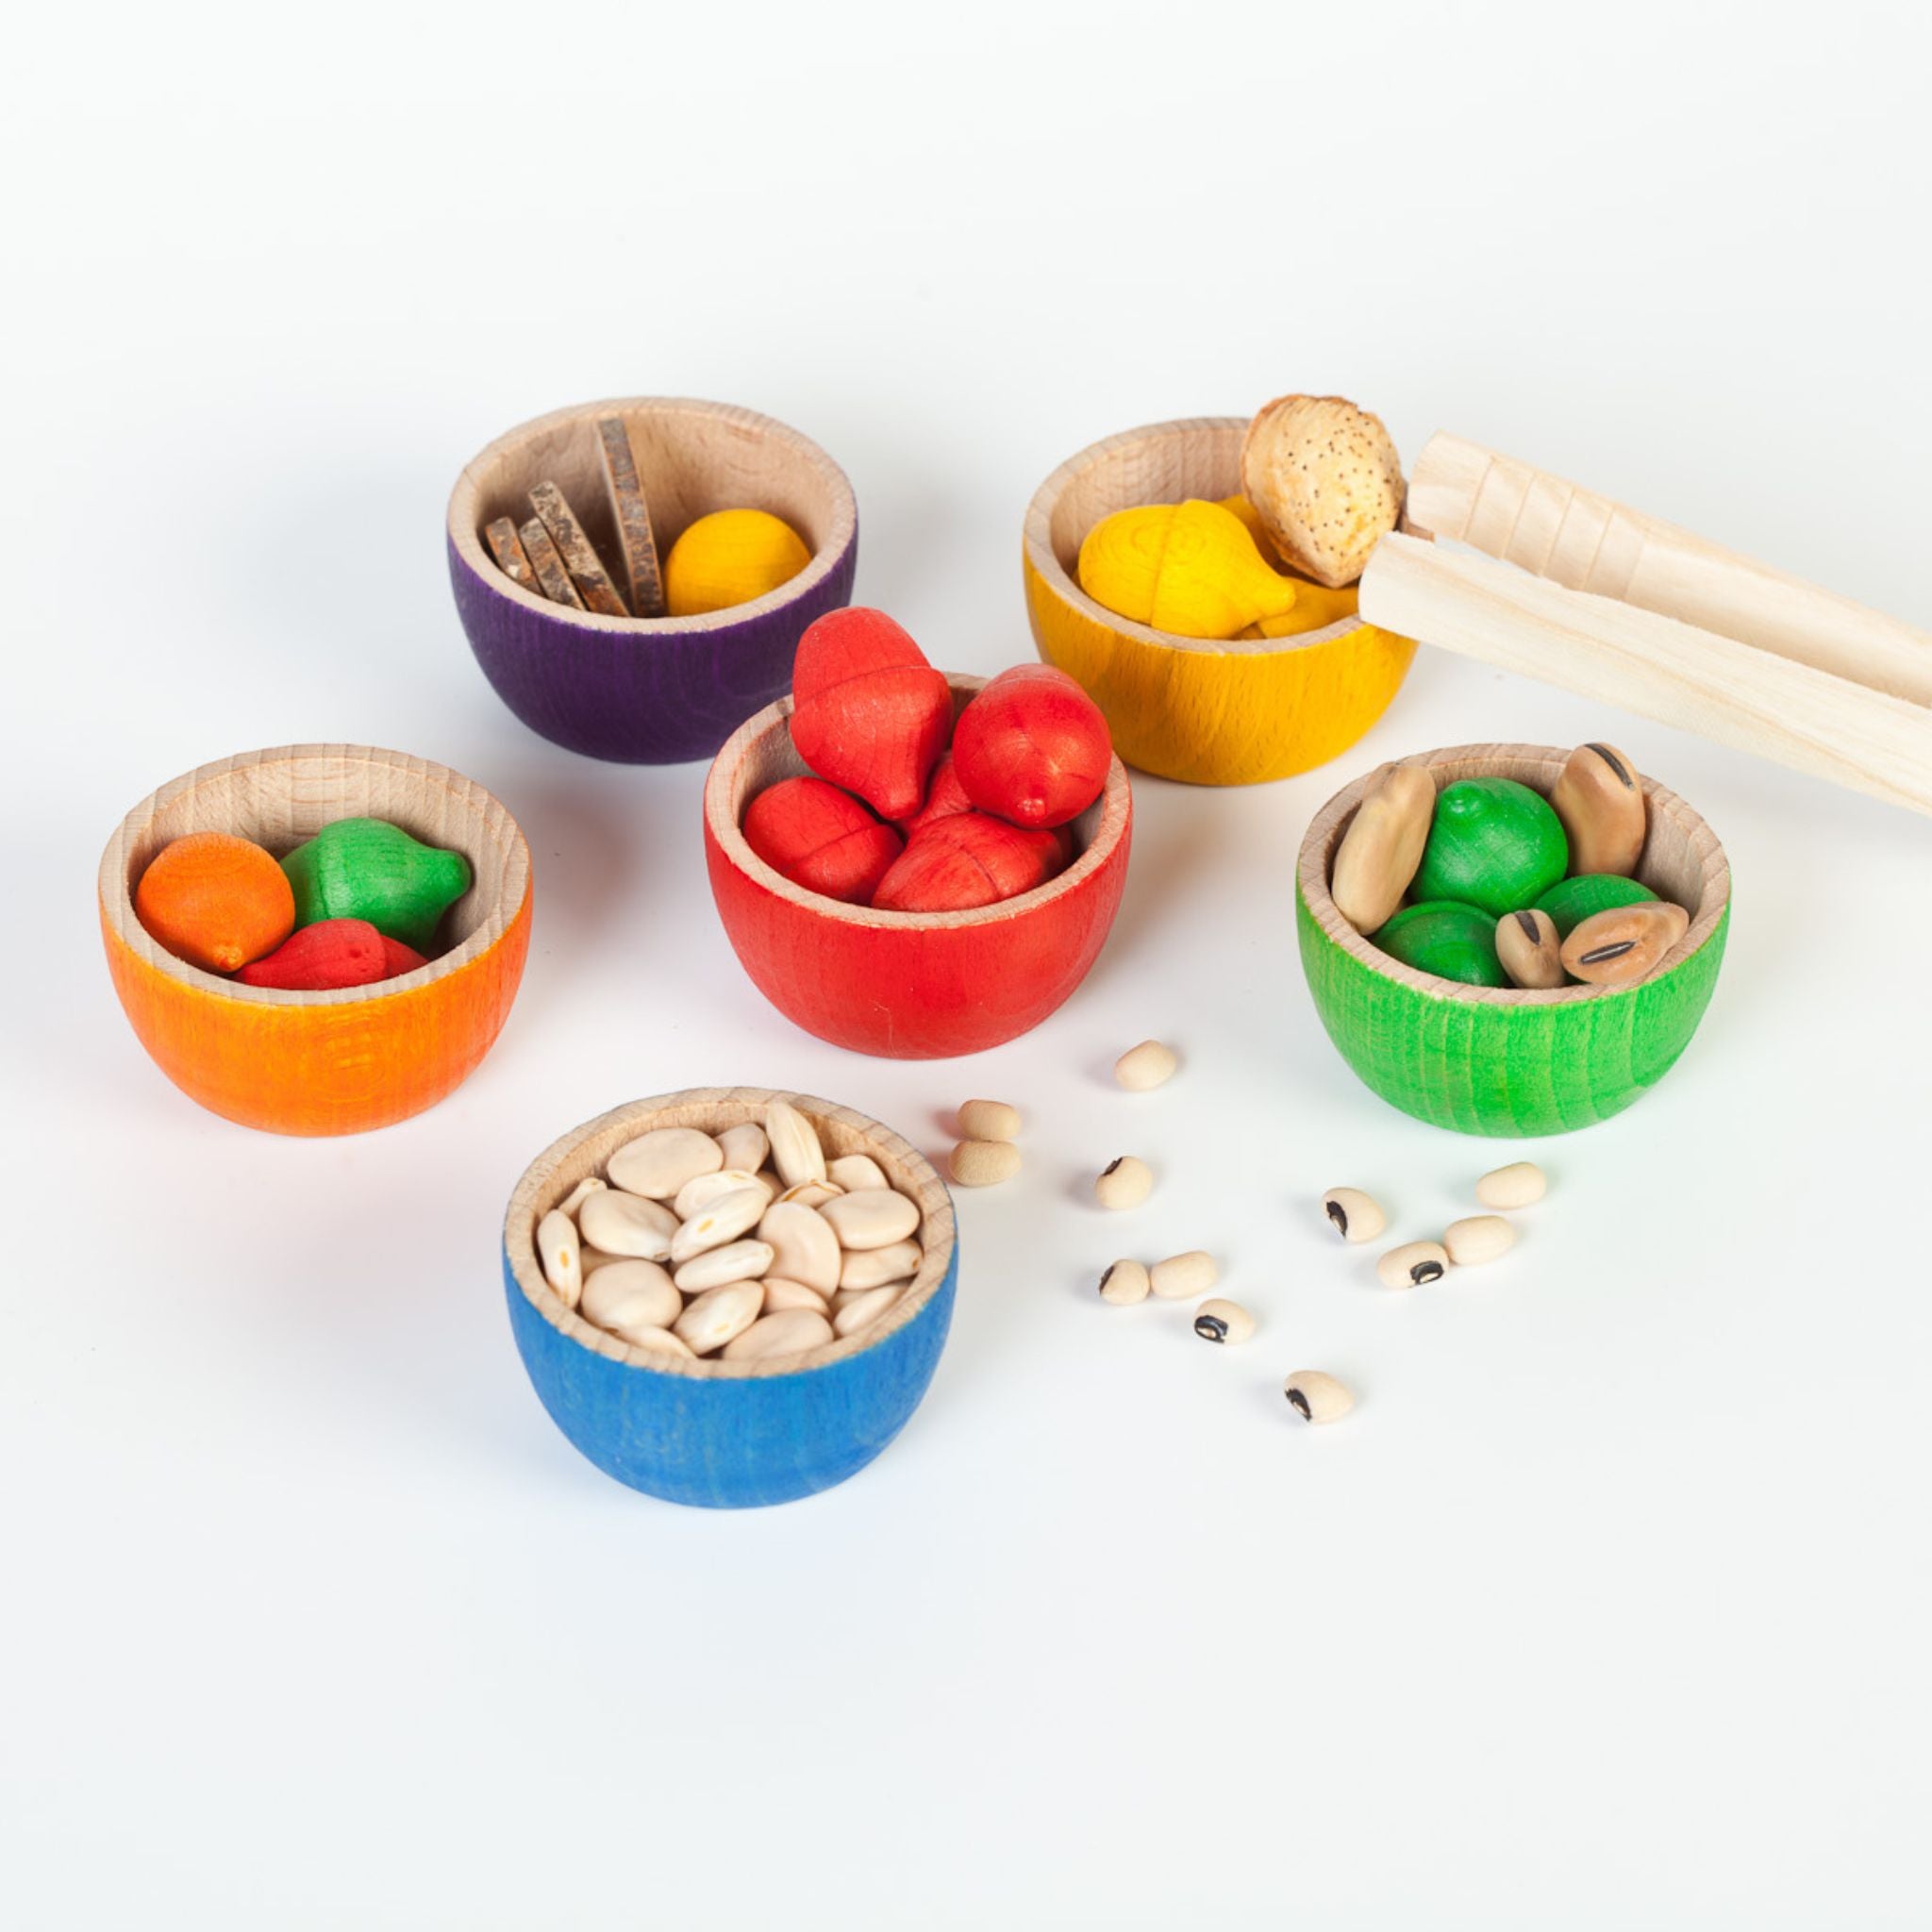 Grapat Wooden Bowls and Acorns Set With Pieces From Nature